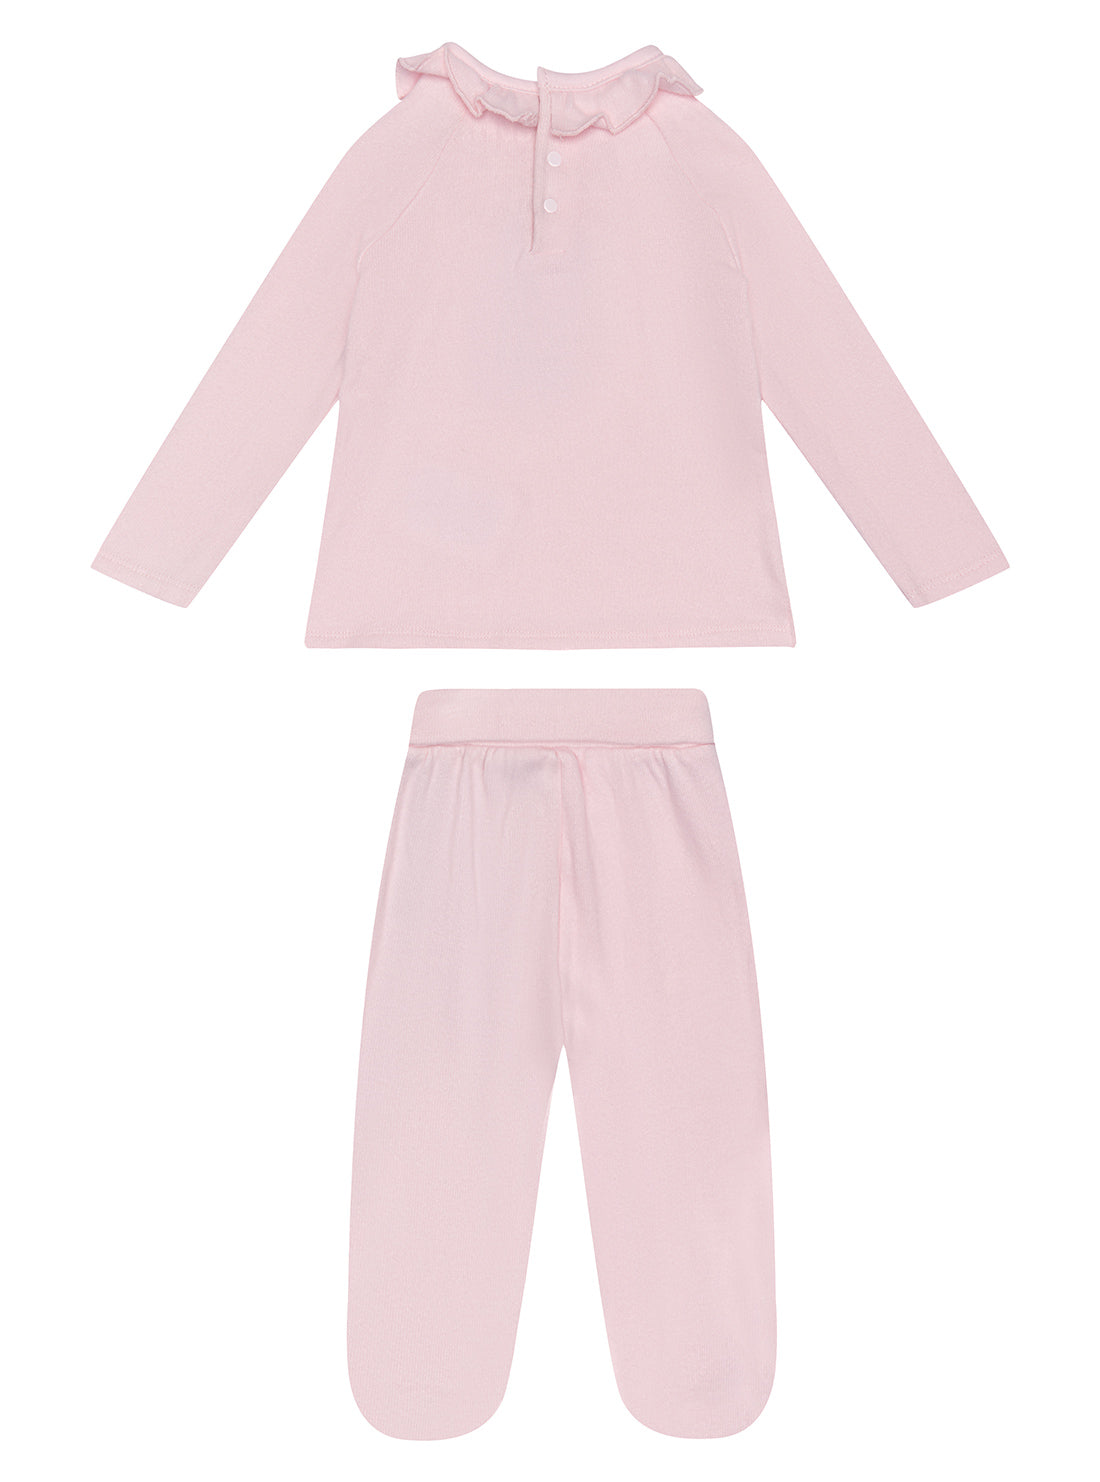 GUESS Pink Top and Pants 2 Piece Set (3-12M) back view